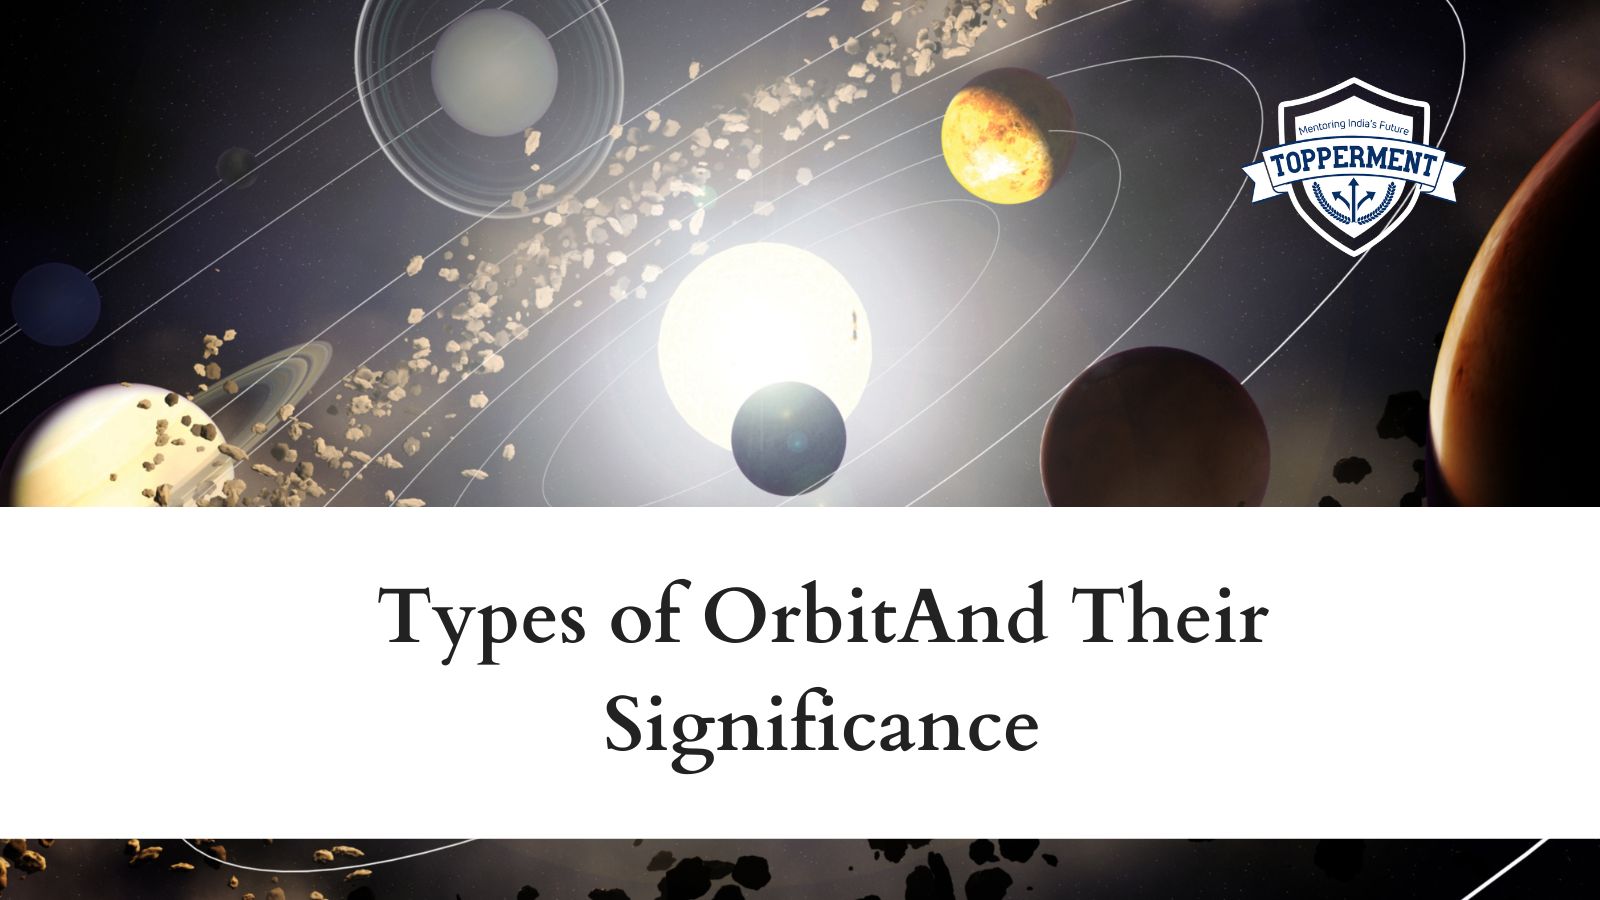 Types-Of-Orbit-And-Their-Significance-Best-UPSC-IAS-Coaching-For-Mentorship-And-Guidance